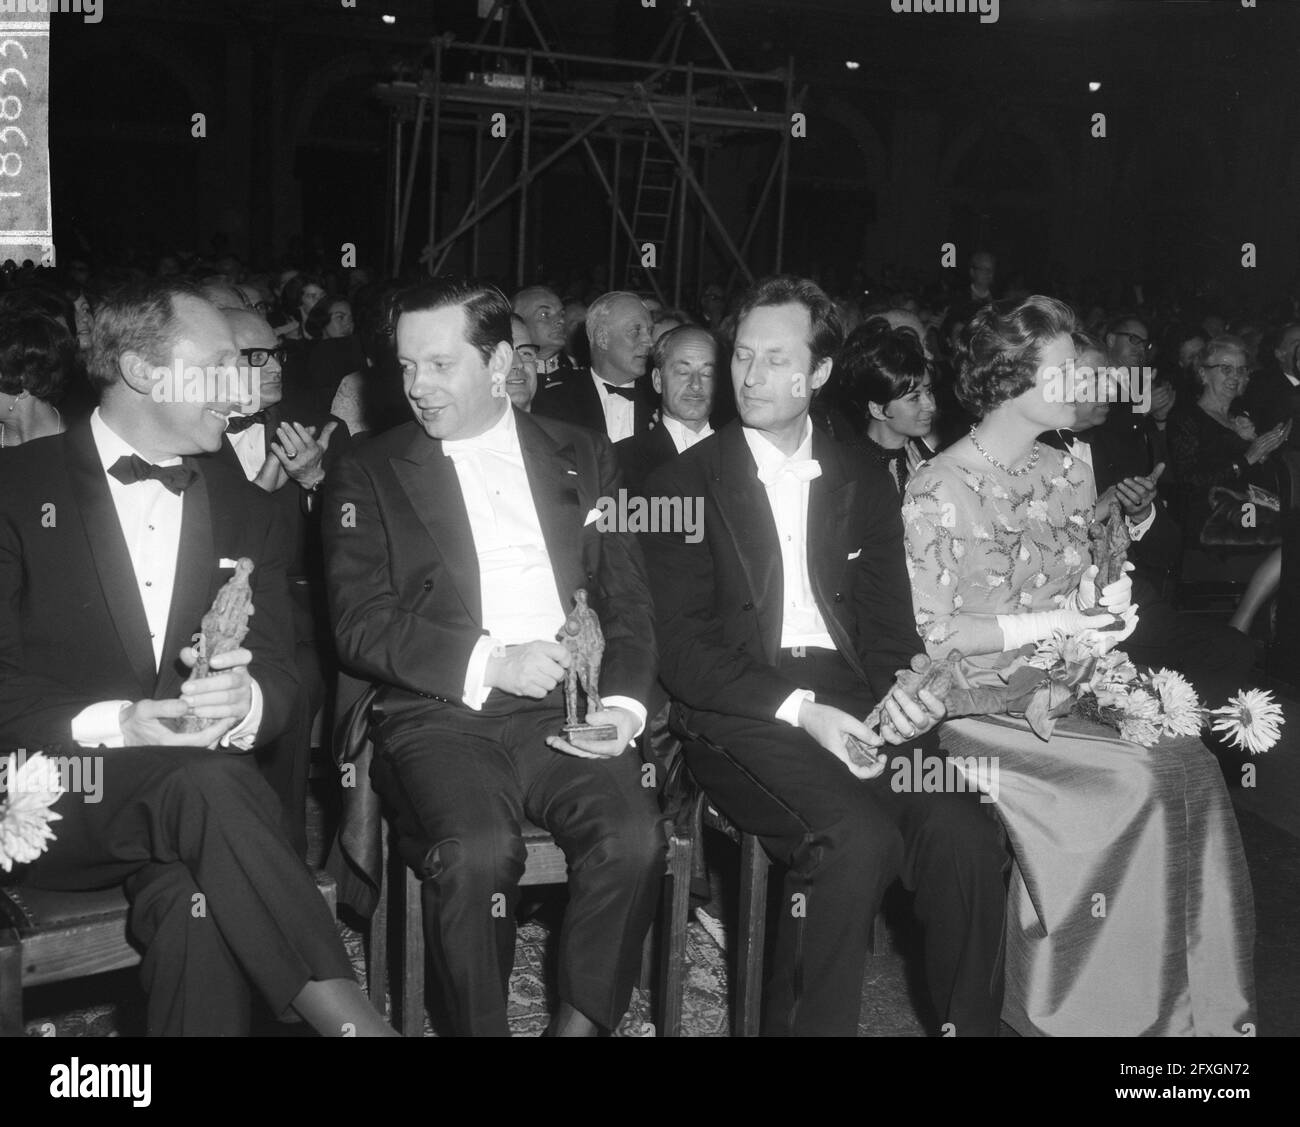 Four Edison winners; from left to right violinists Herman Krebbers and Arthur Grumiaux, conductor Carlo Maria Giulini and Mrs. Soames (daughter of Winston Churchill), October 29, 1965, classical music, musicians, awards, prize presentations, The Netherlands, 20th century press agency photo, news to remember, documentary, historic photography 1945-1990, visual stories, human history of the Twentieth Century, capturing moments in time Stock Photo